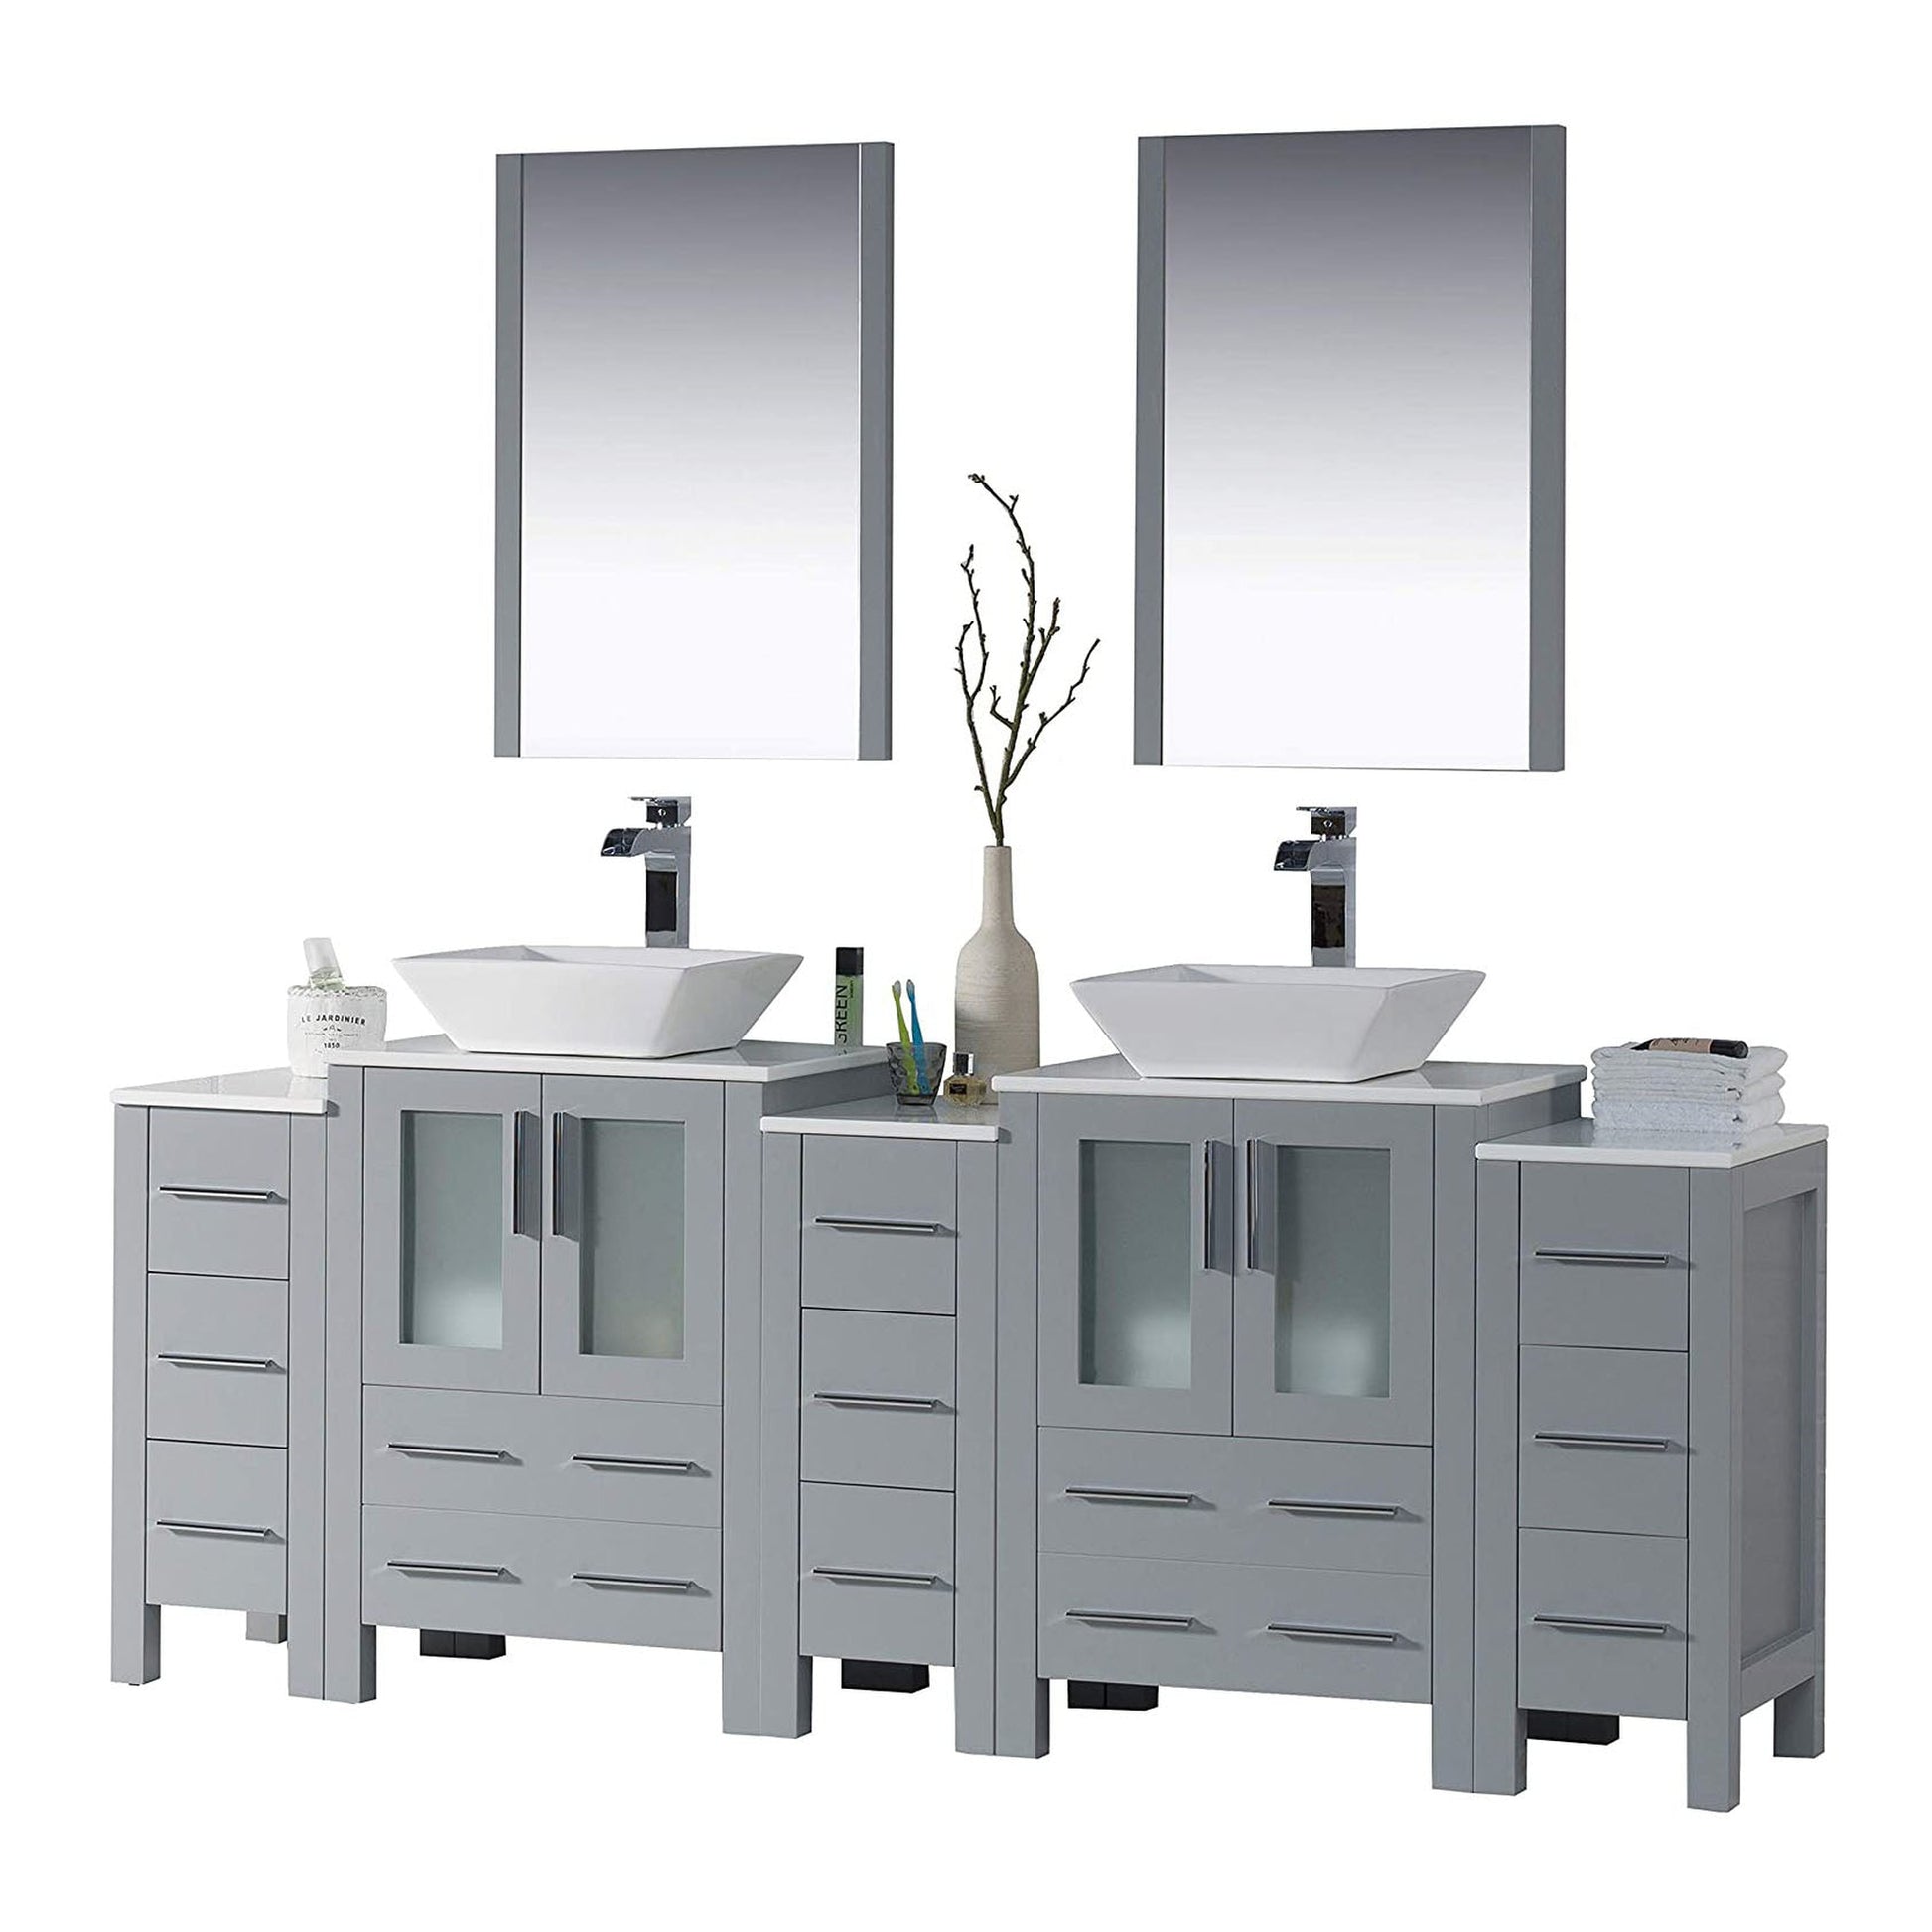 Blossom Sydney 84" Metal Gray Freestanding Vanity With Ceramic Double Vessel Sinks, Mirror and Three Side Cabinet